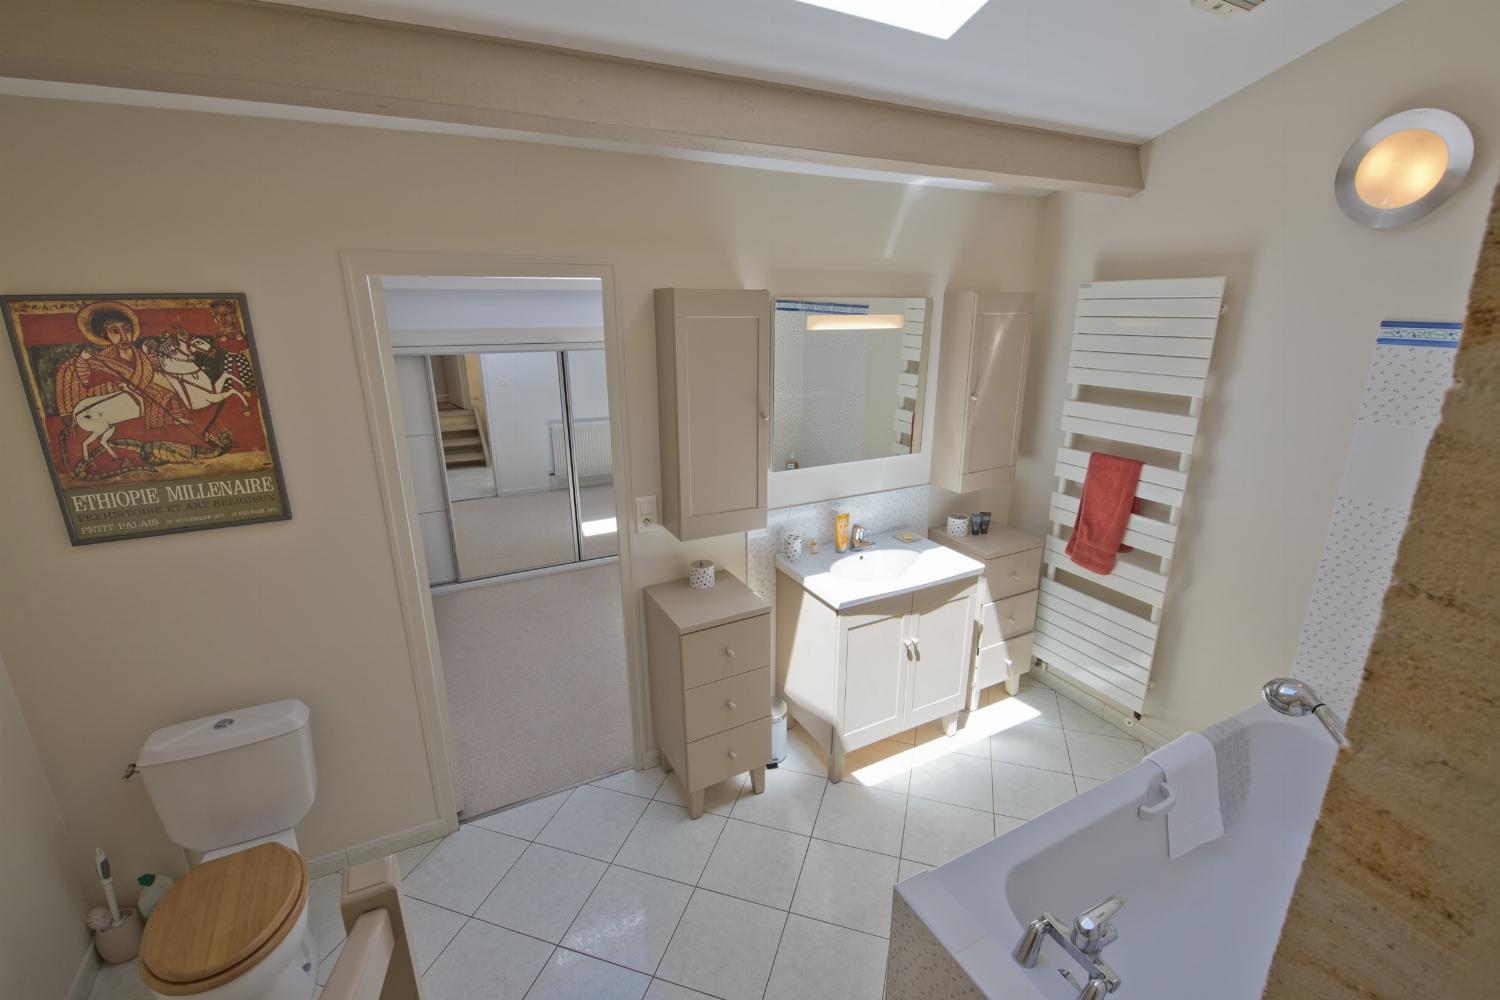 Bathroom | Self-catering accommodation in Gironde